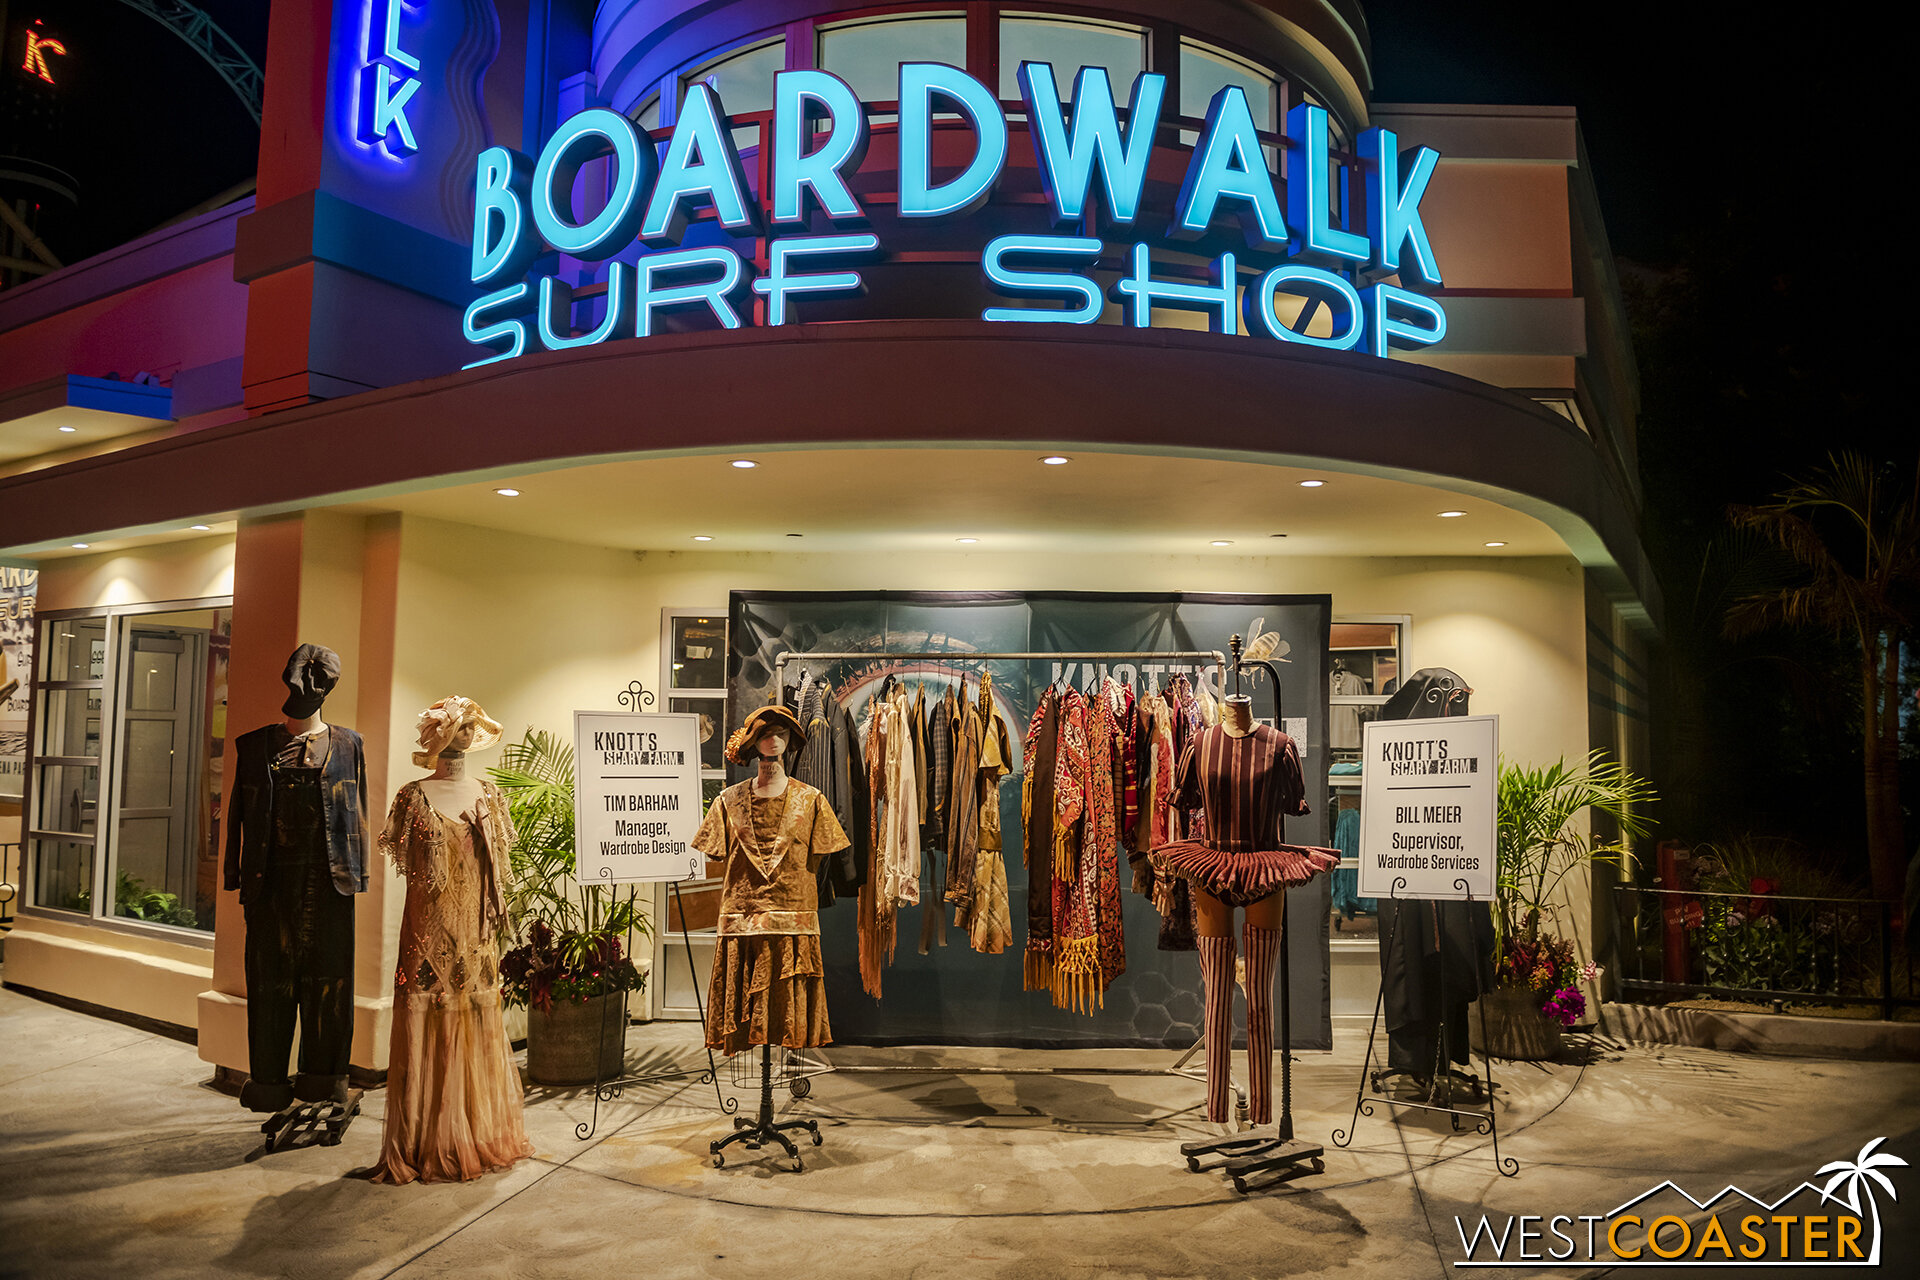  At the Boardwalk Surf Shop, a wardrobe display was set up with The Gore-ing 20’s outfits on the left half and the Mesmer maze costumes on the right. 